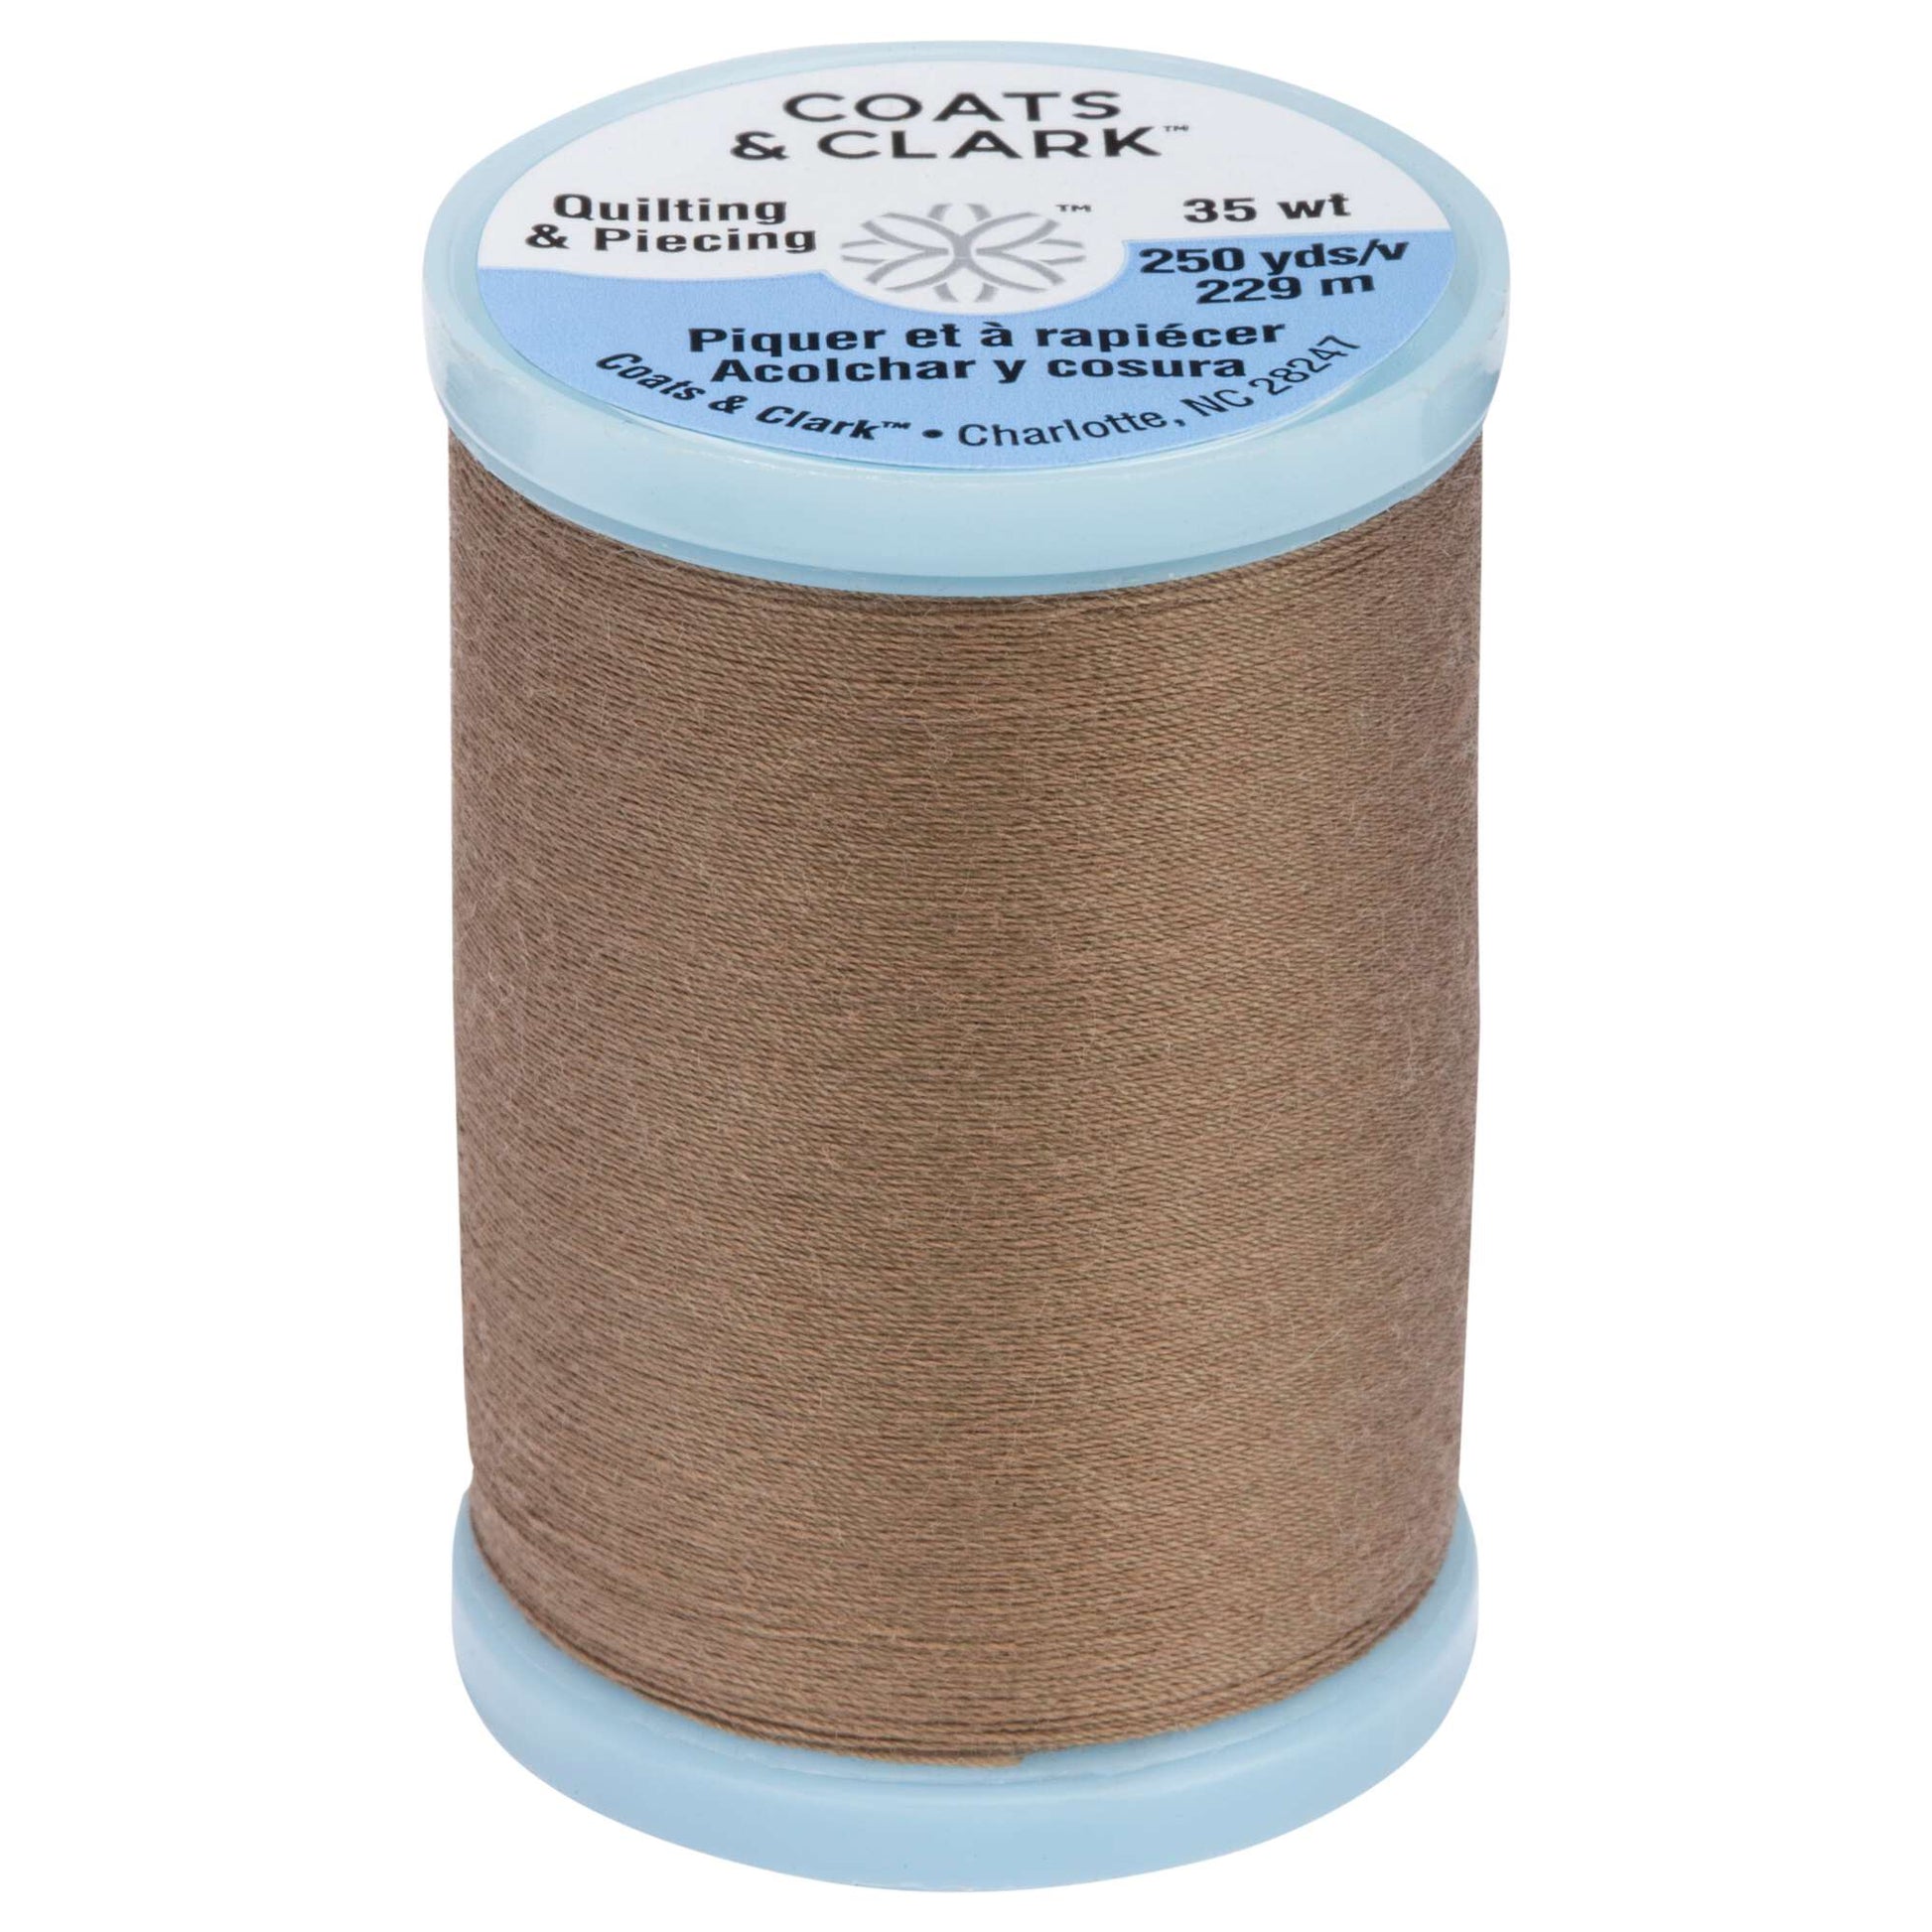 Coats & Clark Cotton Covered Quilting & Piecing Thread (250 Yards) Driftwood